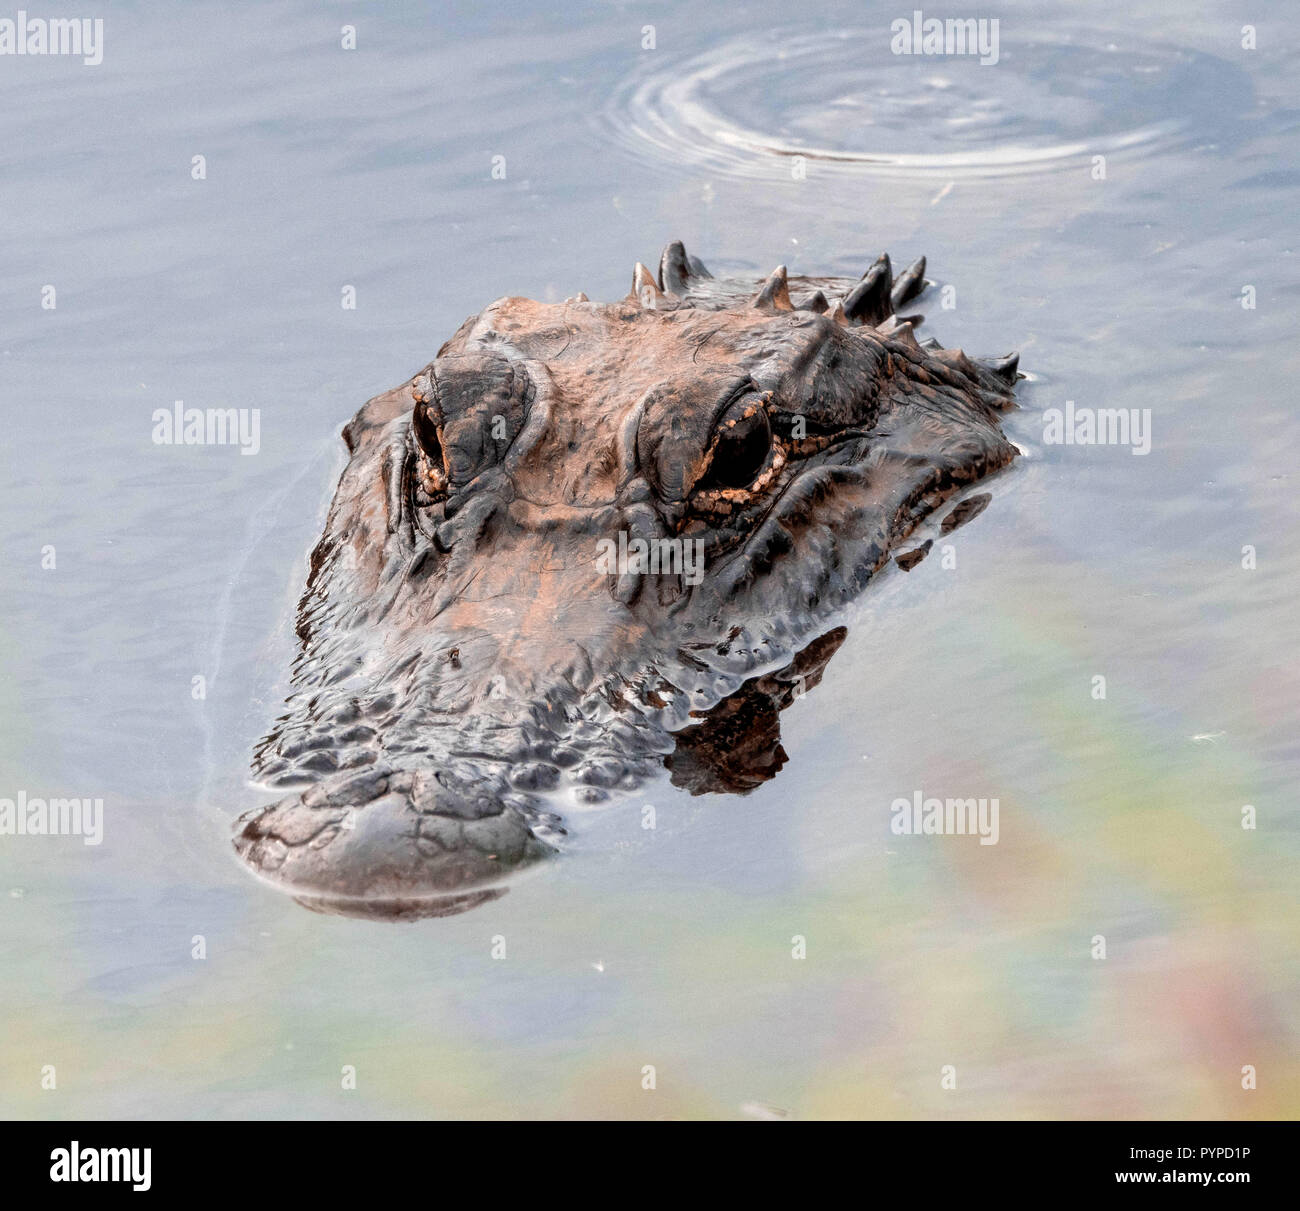 Aligator ( A mississippiensis ) in characteristic swimming position with head just above the water - Savannah National Wildlife Refuge S Carolina USA Stock Photo